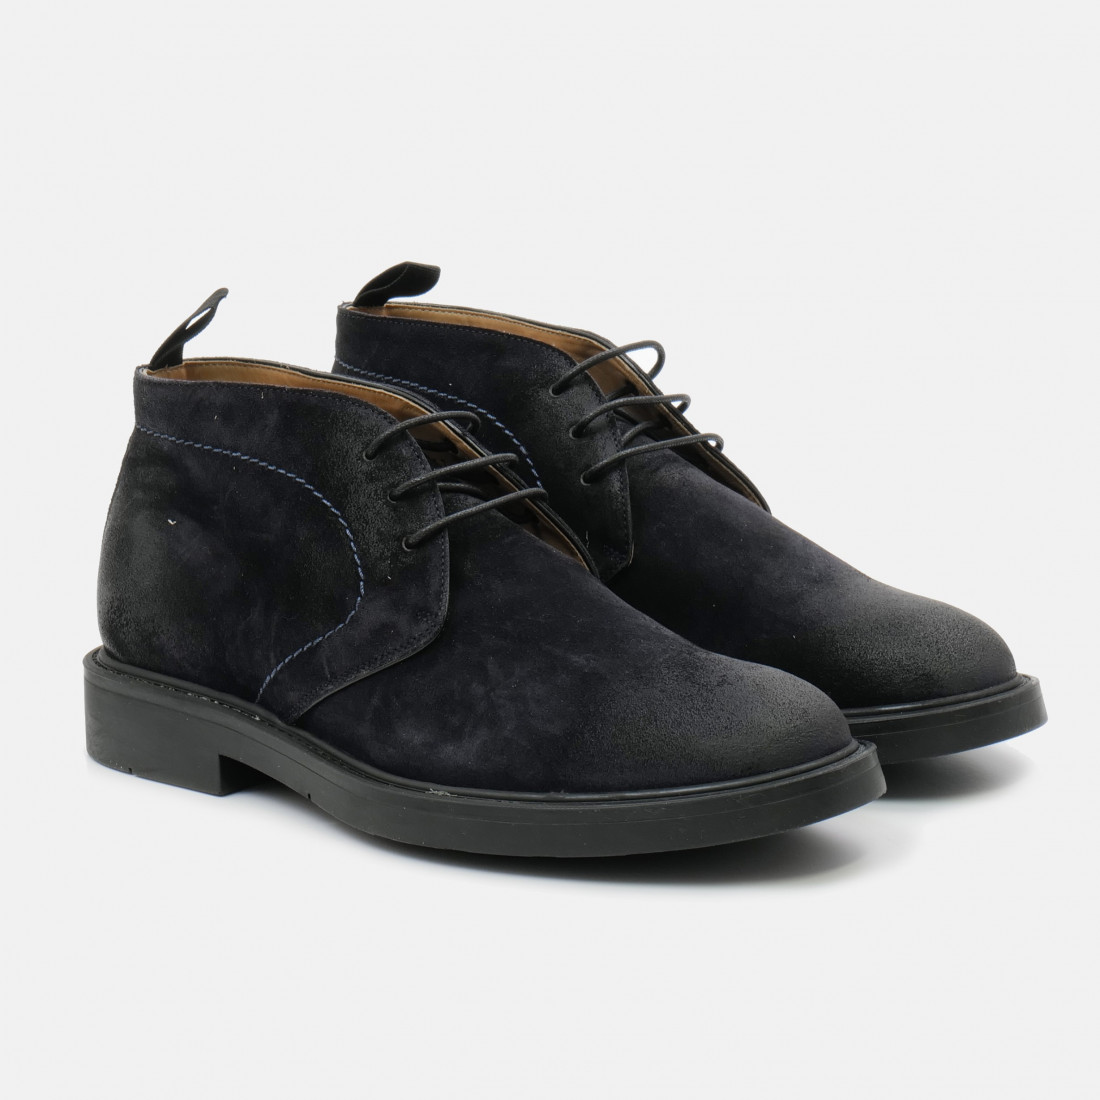 Blue leather Pawelk's lace up ankle boots with metal hooks